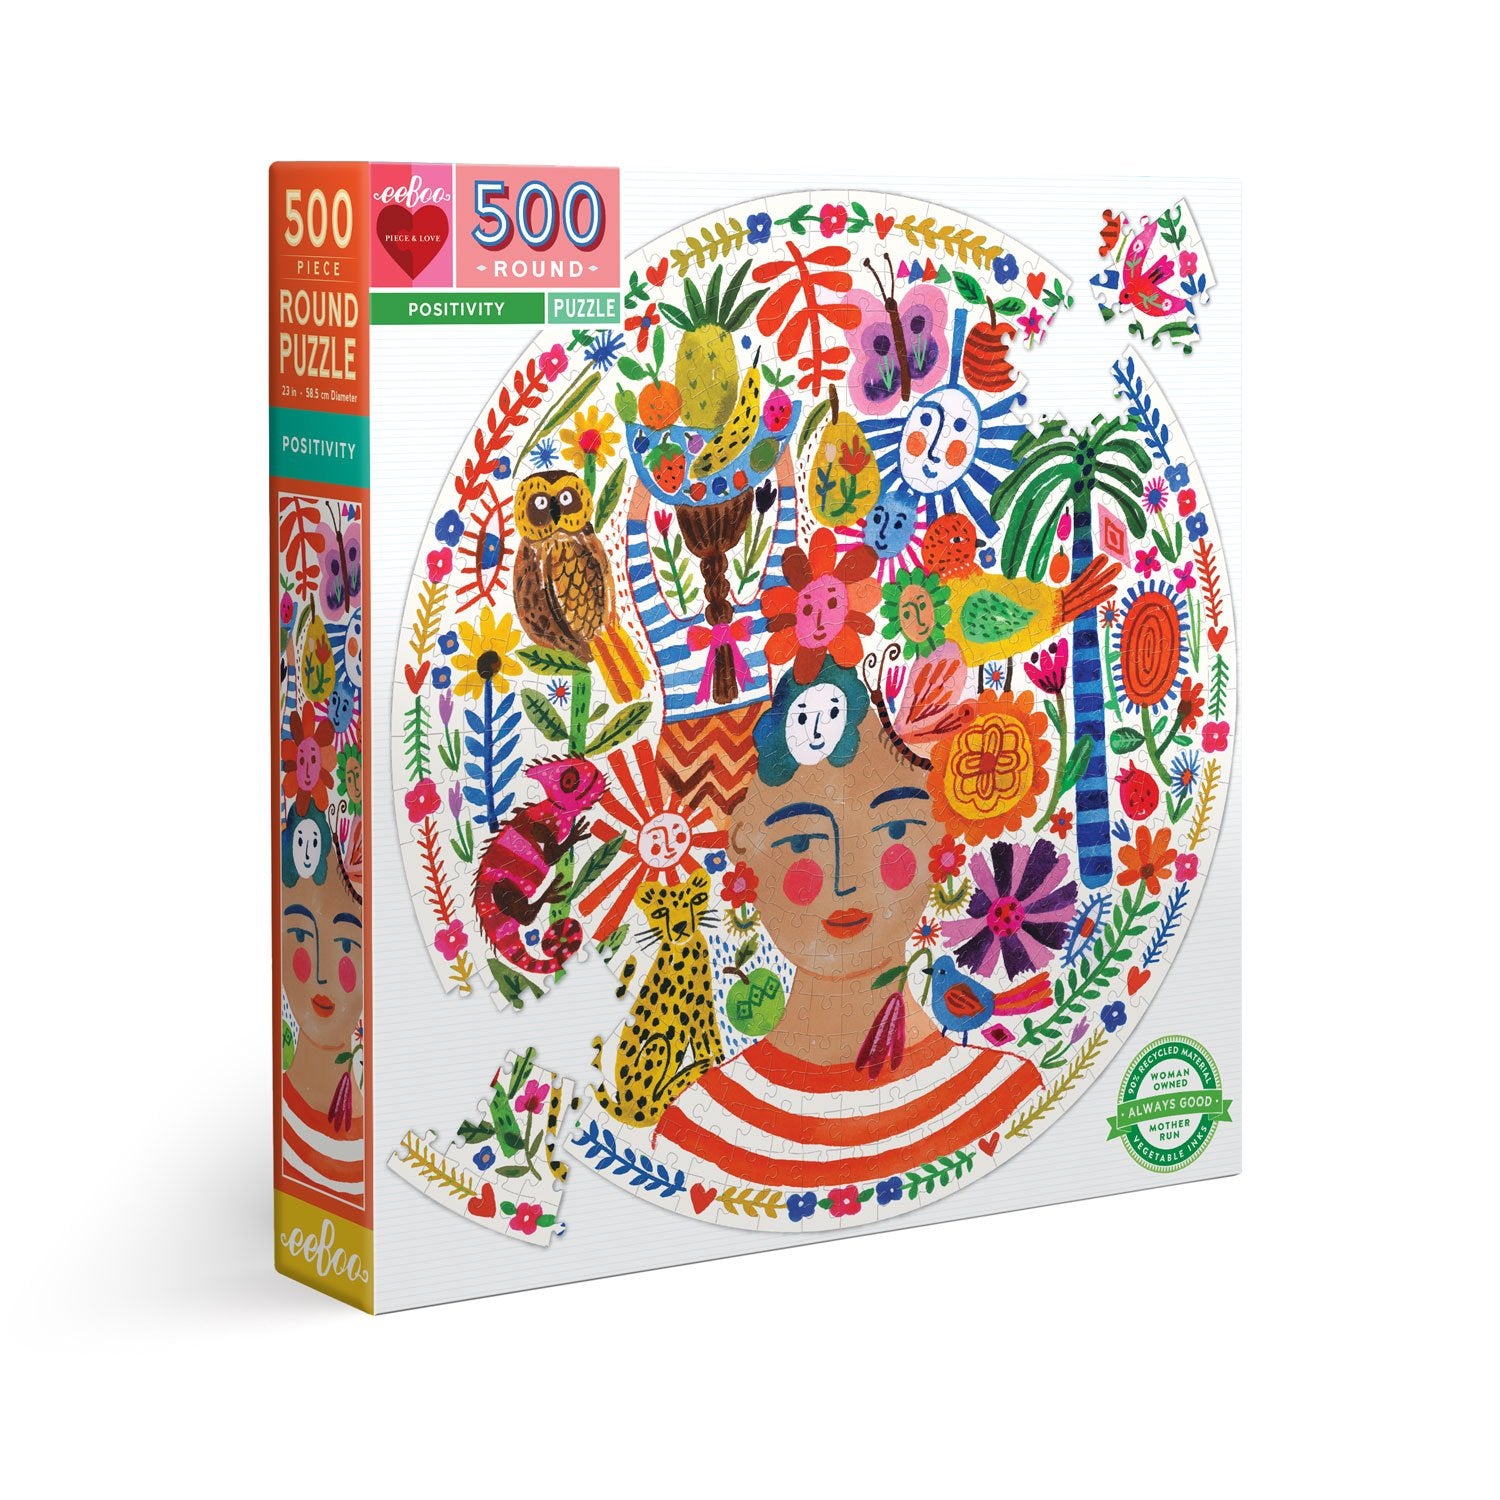 eeBoo 500pc Puzzle Positivity Rd The Toy Wagon